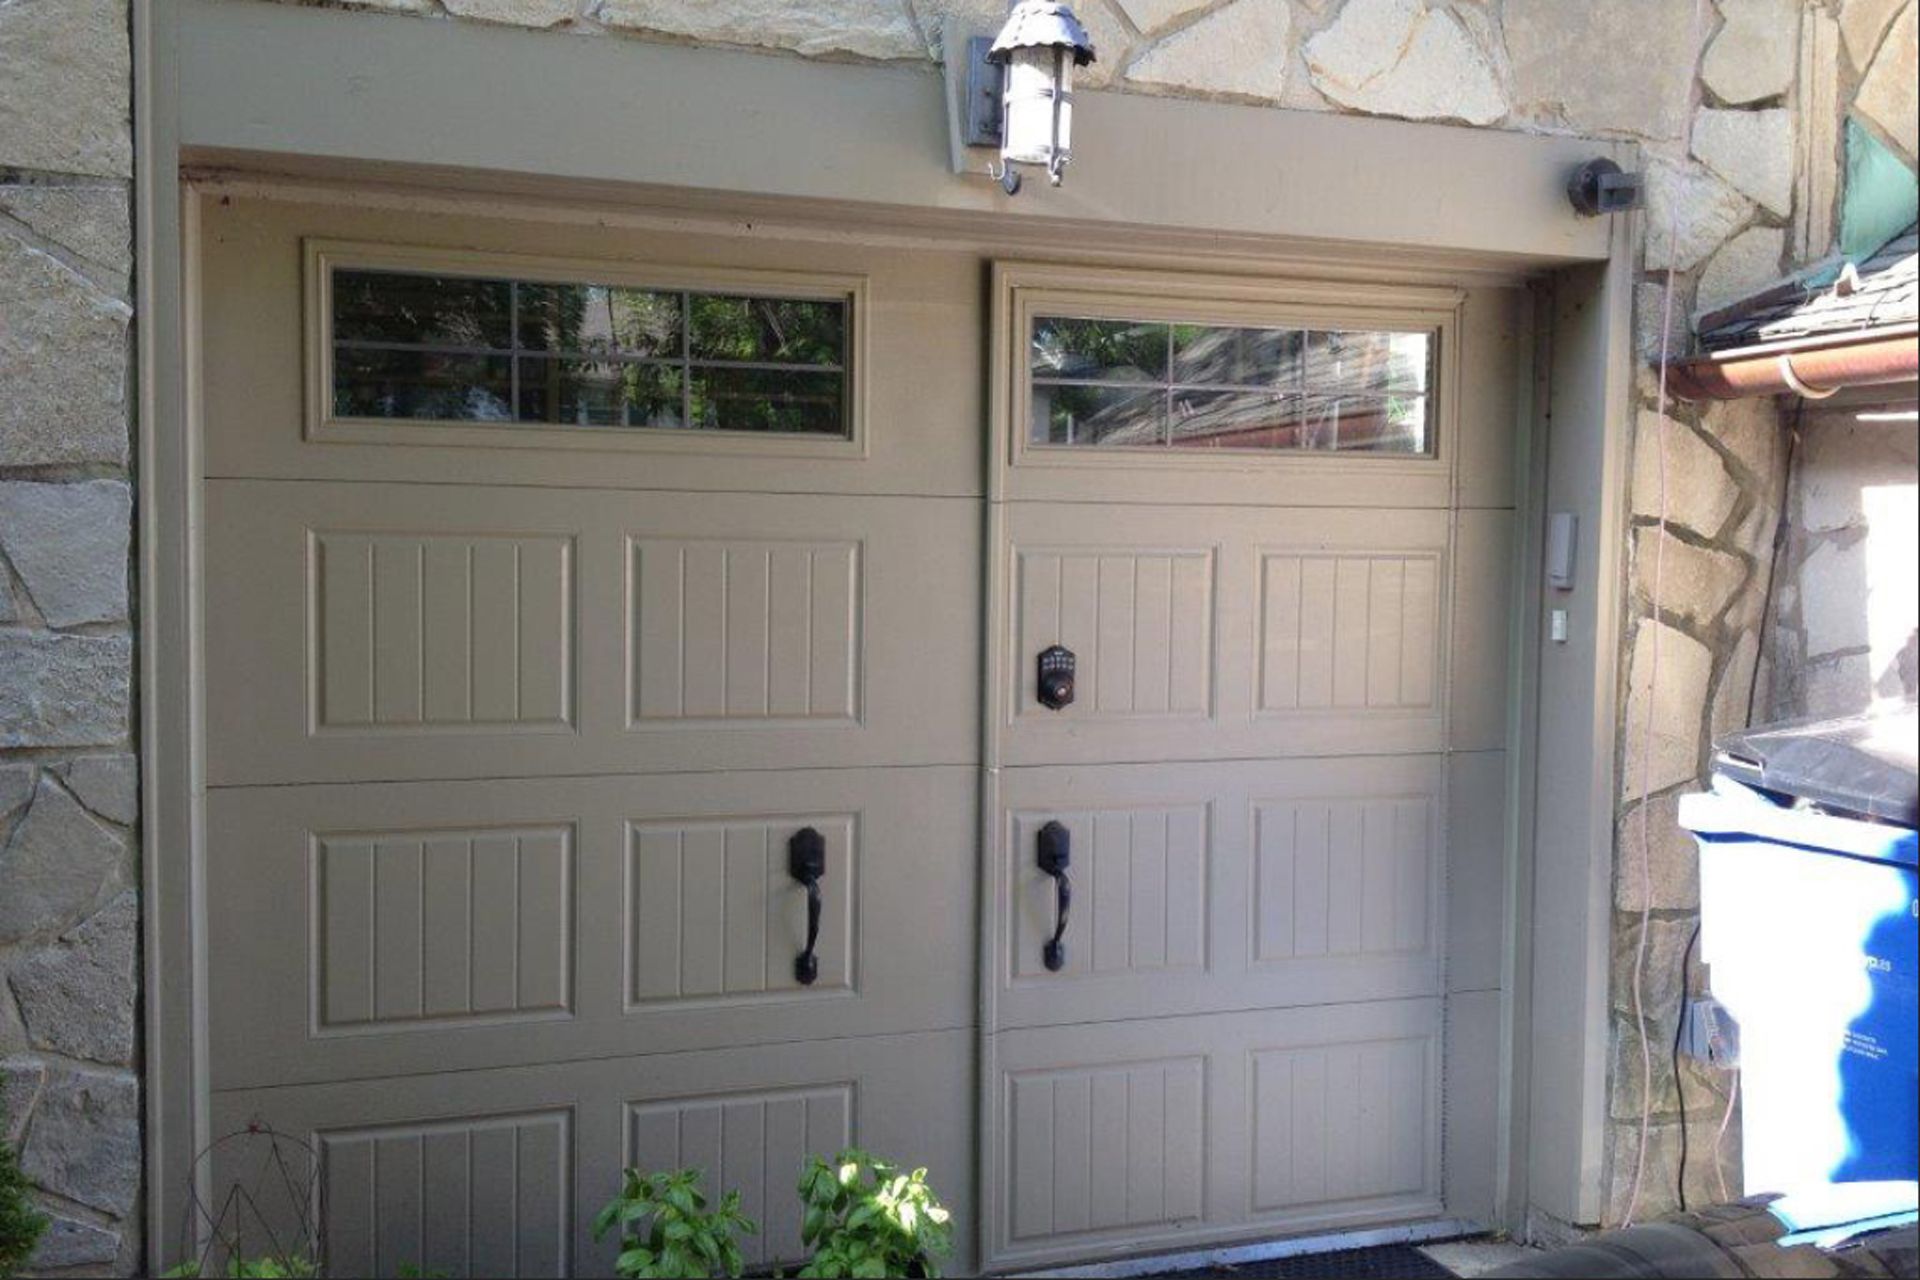 The Ultimate Guide to Insulating Garage Doors for Efficiency